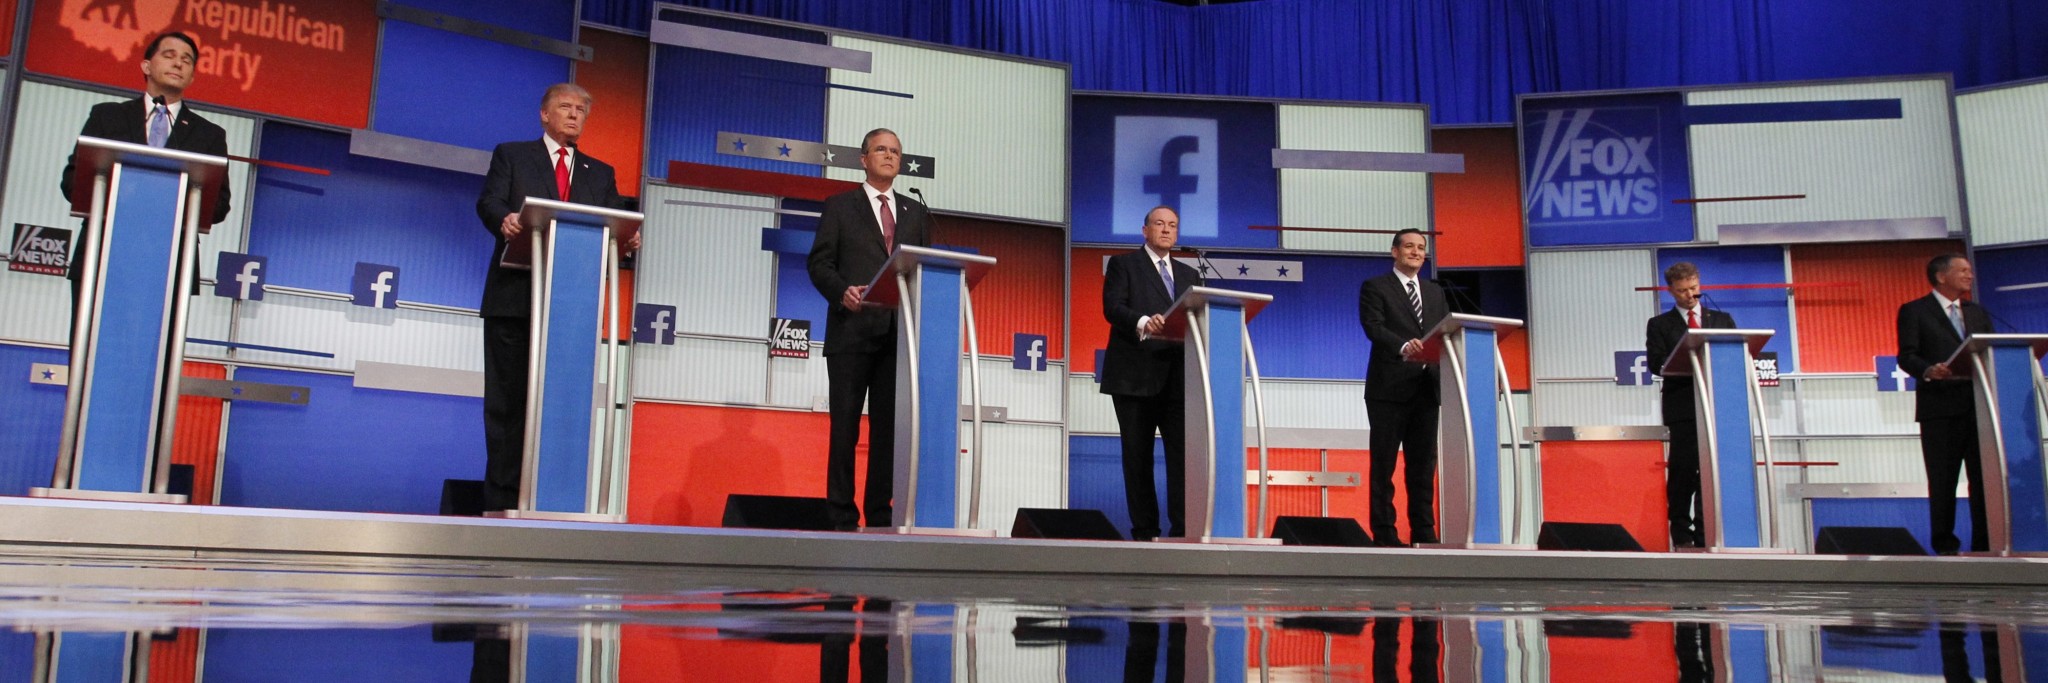 How To Watch the Republican CBS Debate on Your Roku, Apple TV, Android TV, & Fire TV